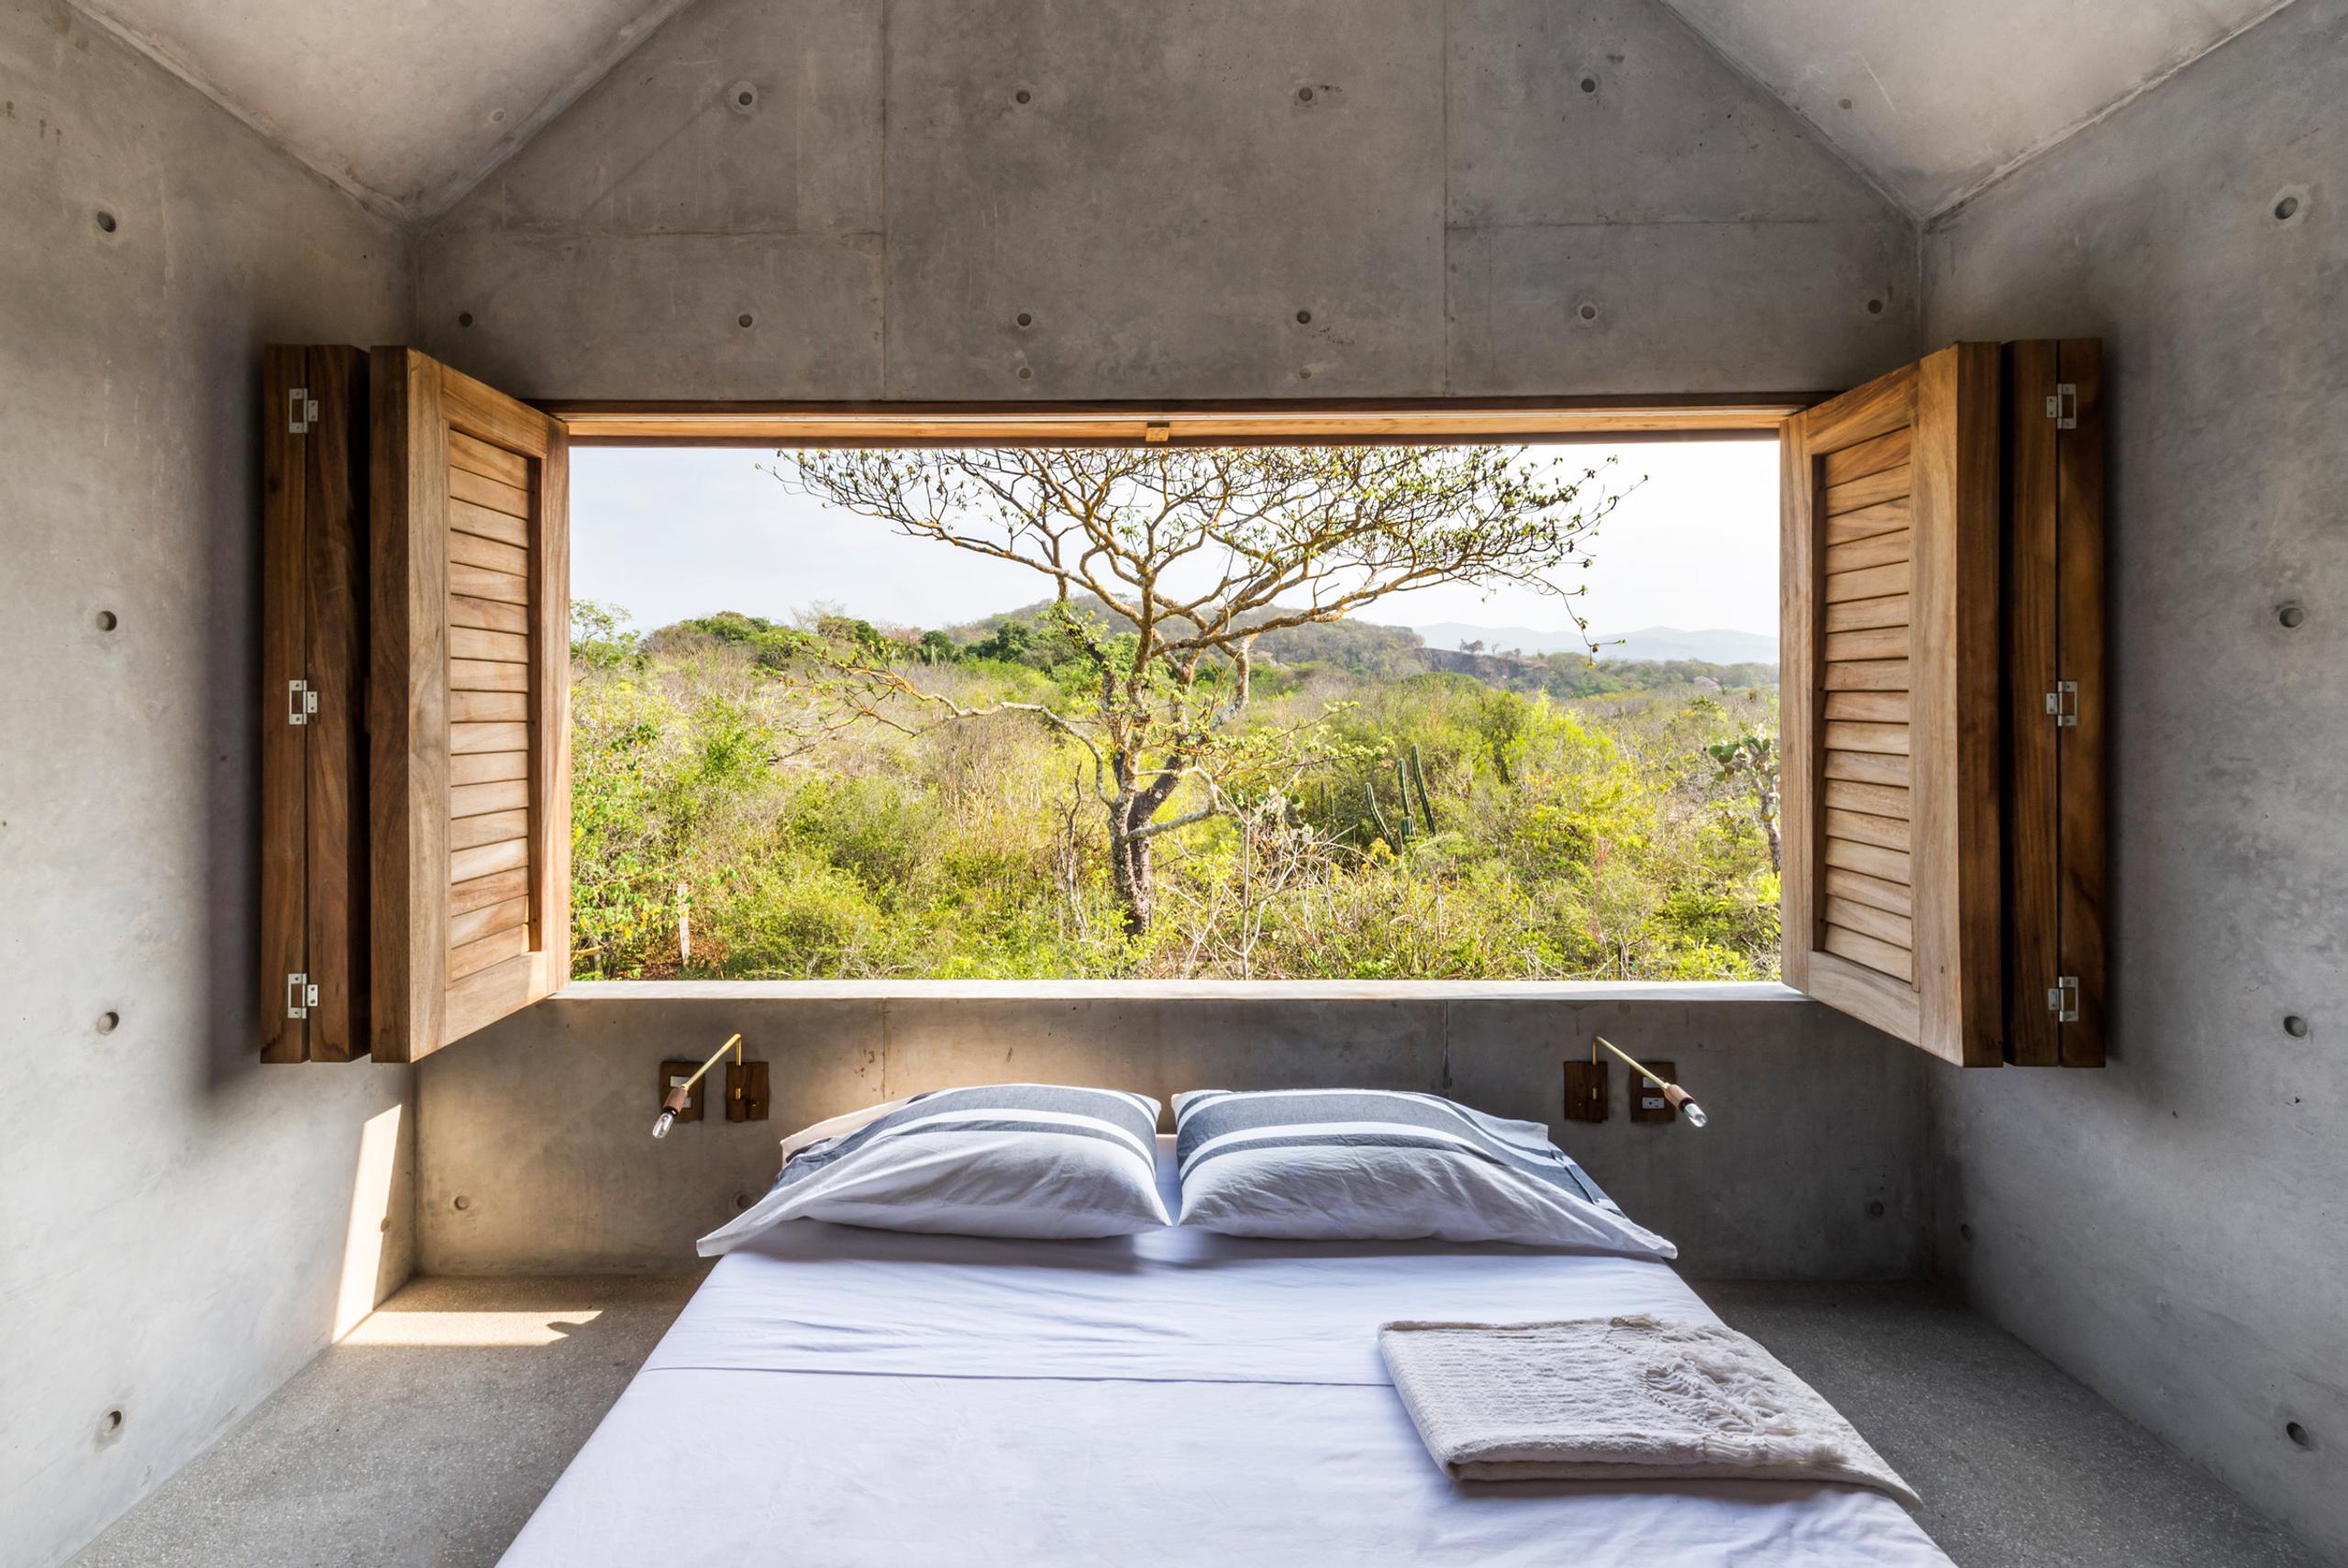 bed with open window revealing nature view